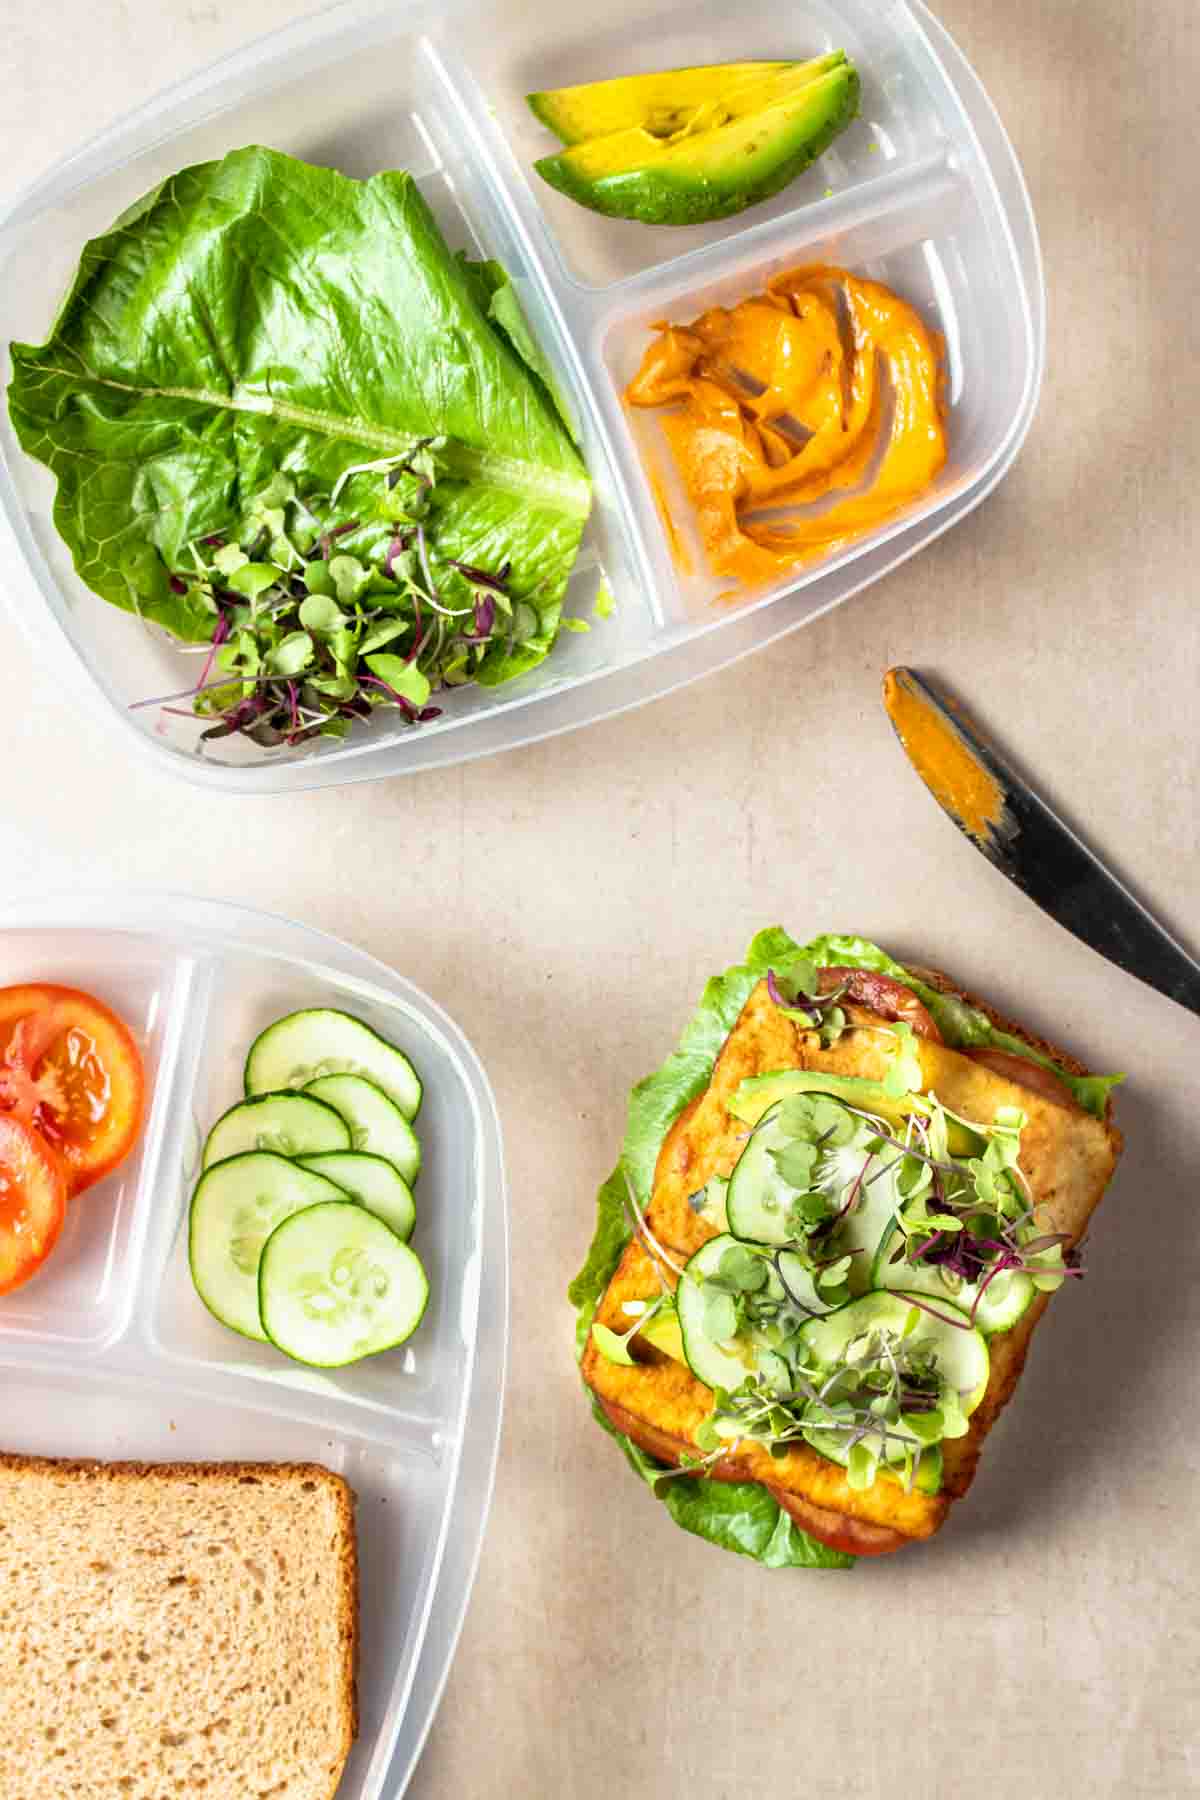 Containers with sections and sandwich toppings in them next to a sandwich being build with lettuce, tofu, cucumbers and sprouts on top next to a knife.